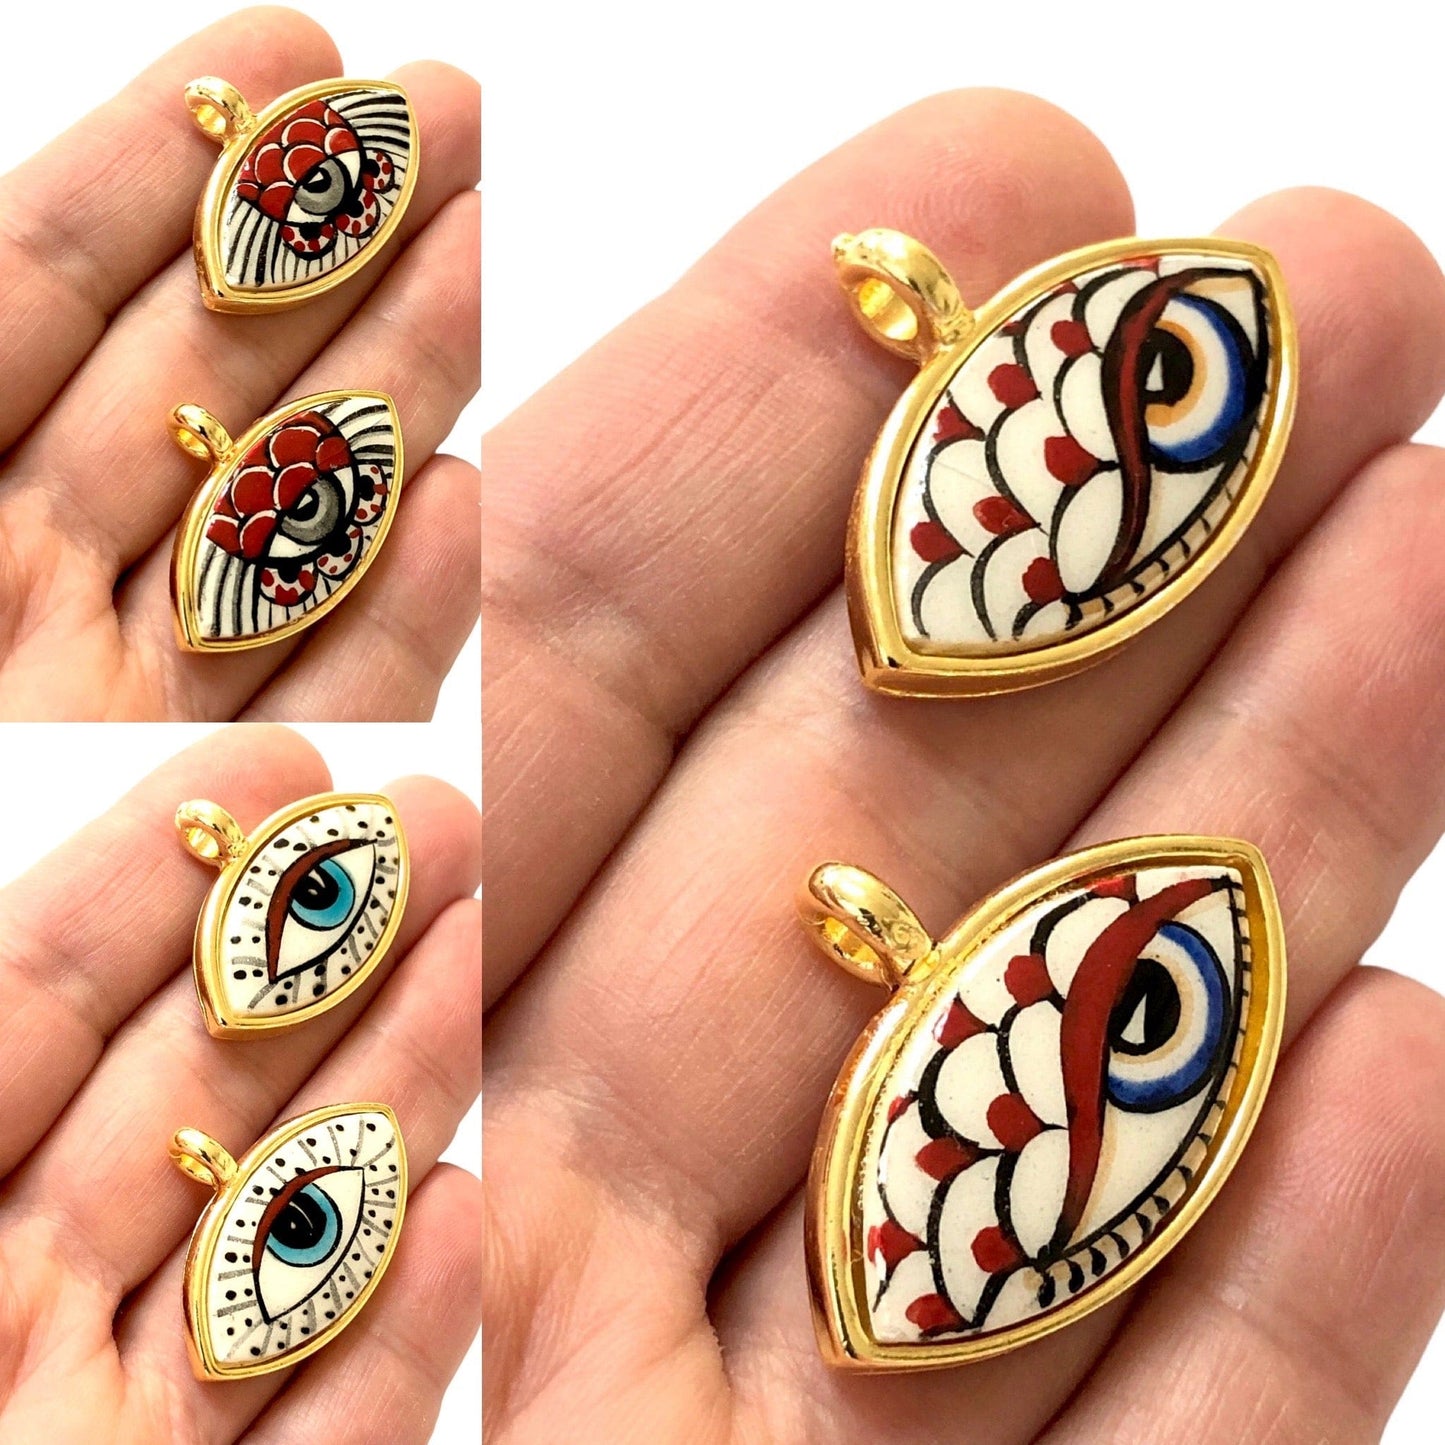 Large Gold Plated Framed Hand Painted Ceramic Eye Pendant-013